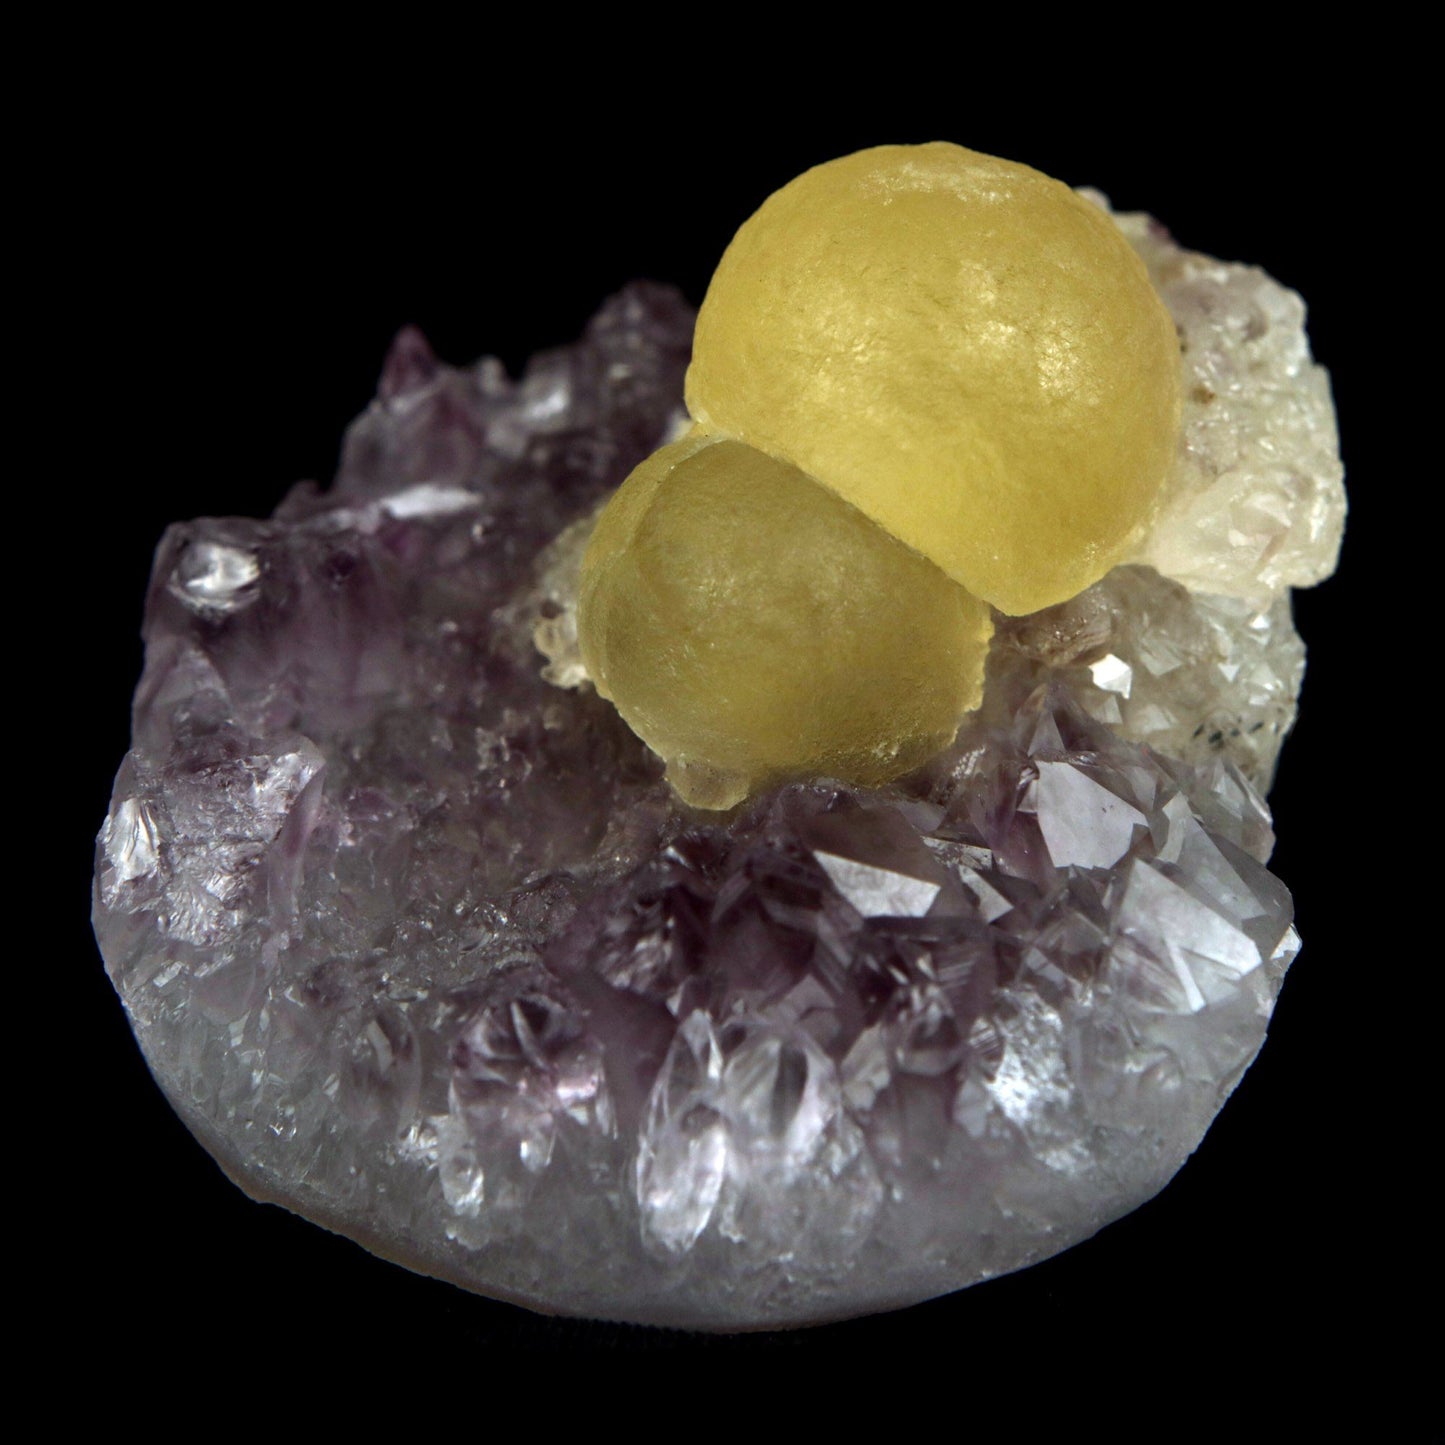 Fluorite Botryoidal on Amethyst Natural Mineral Specimen # B 4888  https://www.superbminerals.us/products/fluorite-botryoidal-on-amethyst-natural-mineral-specimen-b-4888  Features: An extraordinarily botryoidal "ball" of Fluorite is perched atop an exceptionally rich purple coloured Amethyst on Chalcedony and host rock matrix, creating an unusually beautiful specimen